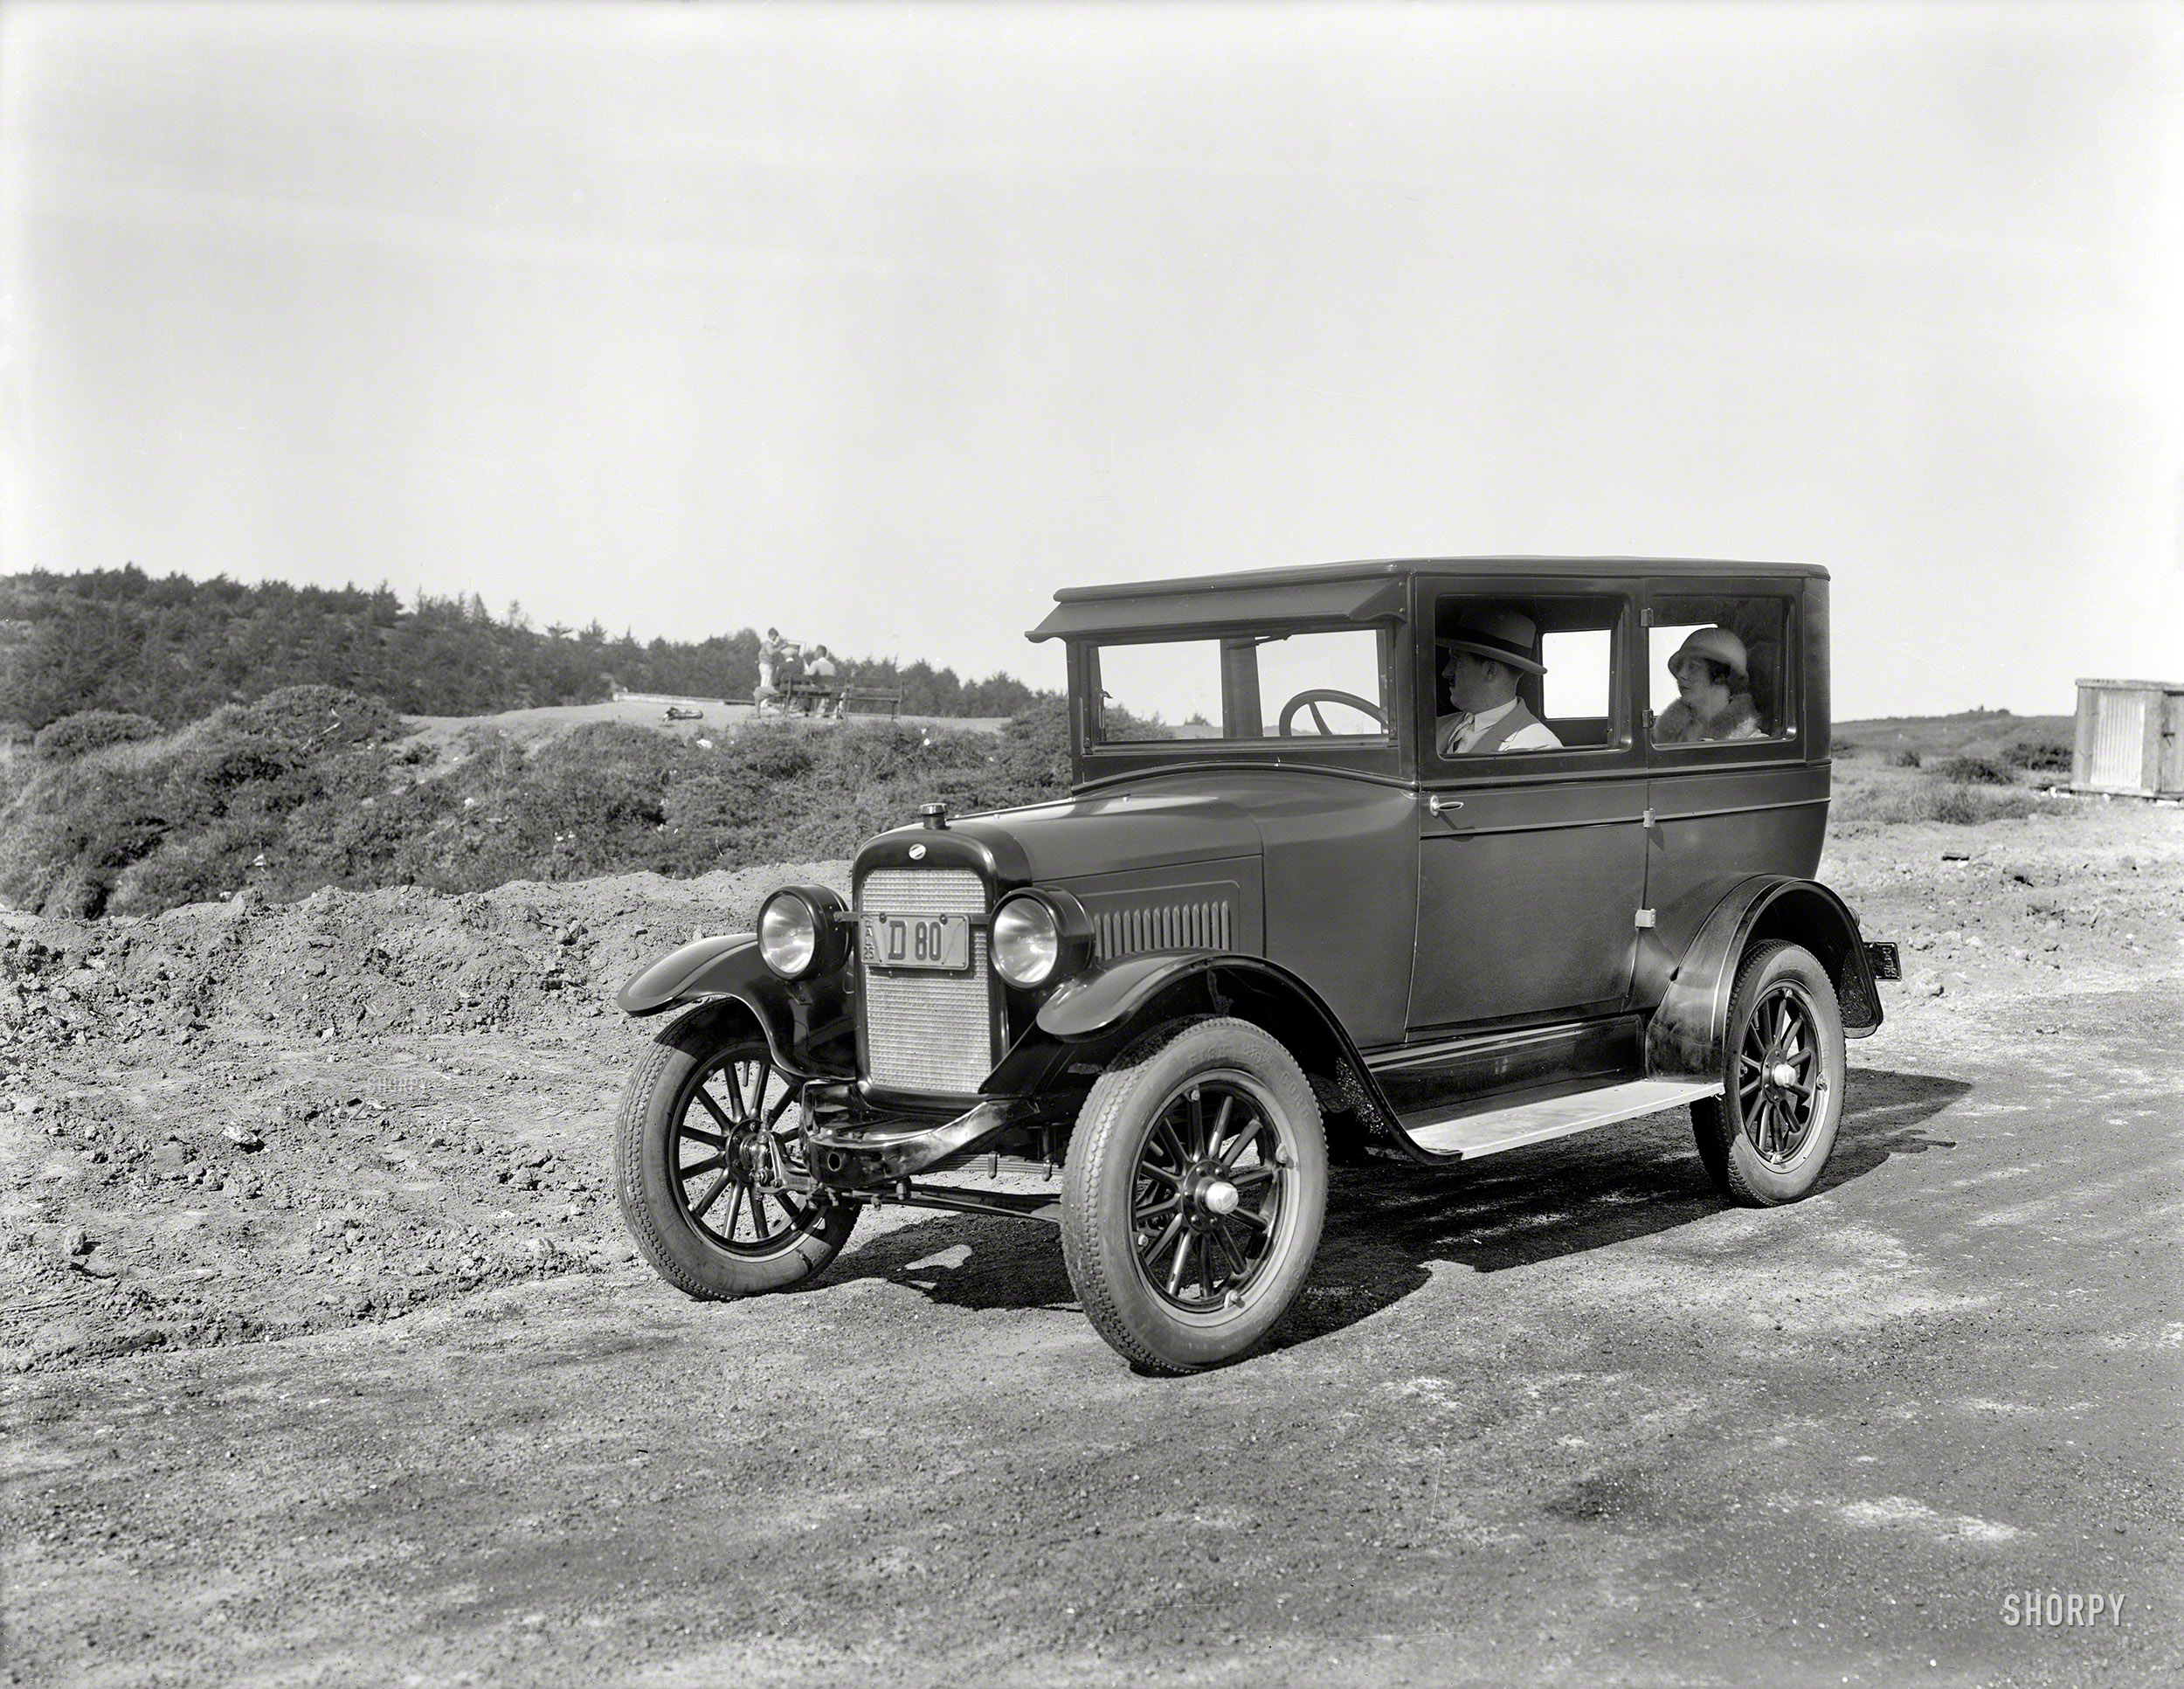 1925. "Overland at Lands End and Lincoln Park golf course." Latest entry in the Shorpy Showcase of Extinct Automobiles. 6½x8½ glass negative from the Wyland Stanley collection of San Francisciana, scanned by Shorpy. View full size.